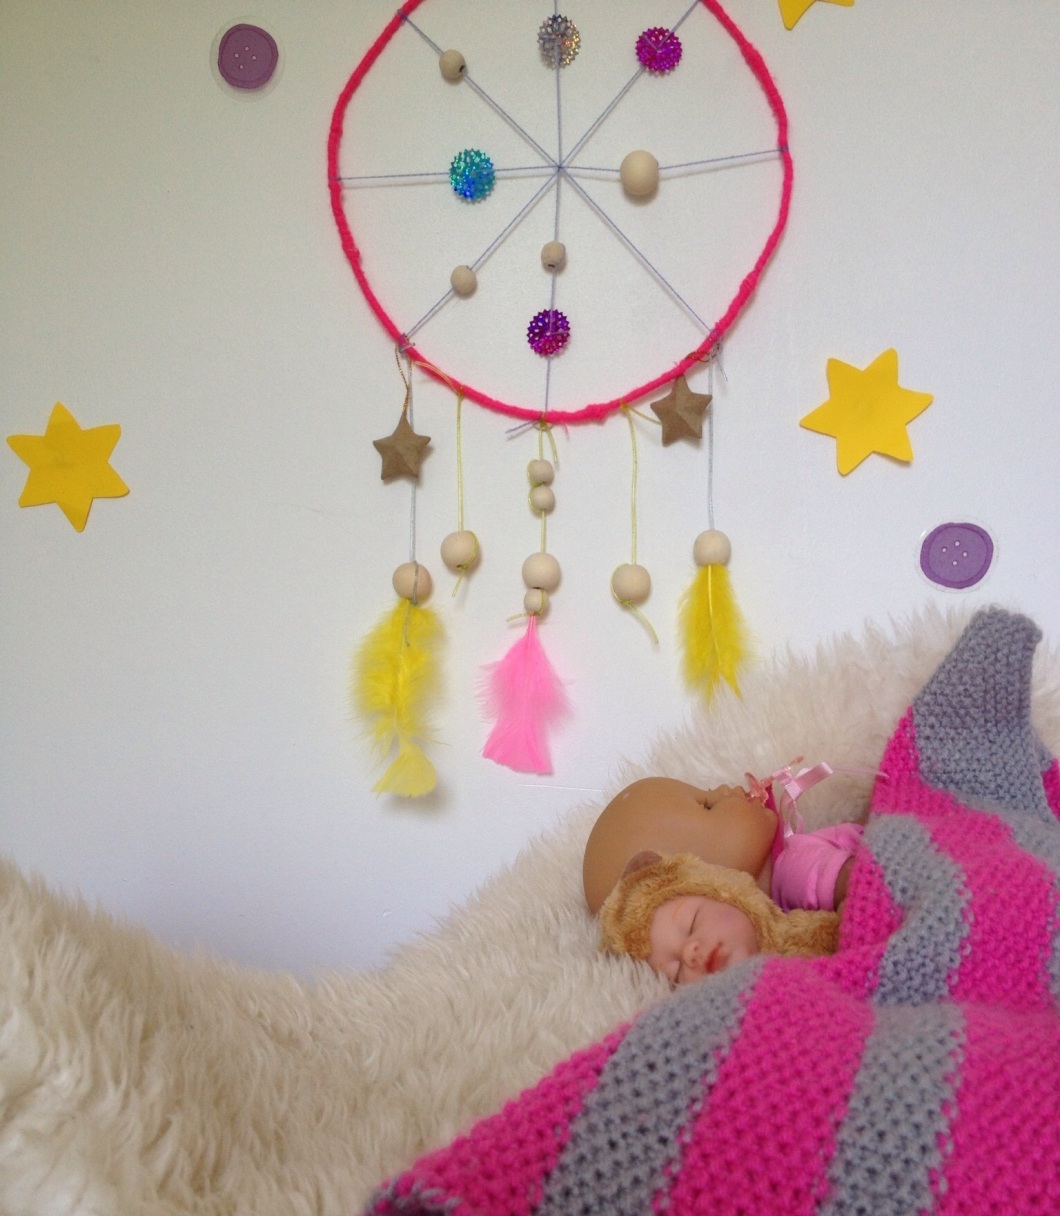 Dream catcher by Learn and Play en Anglais